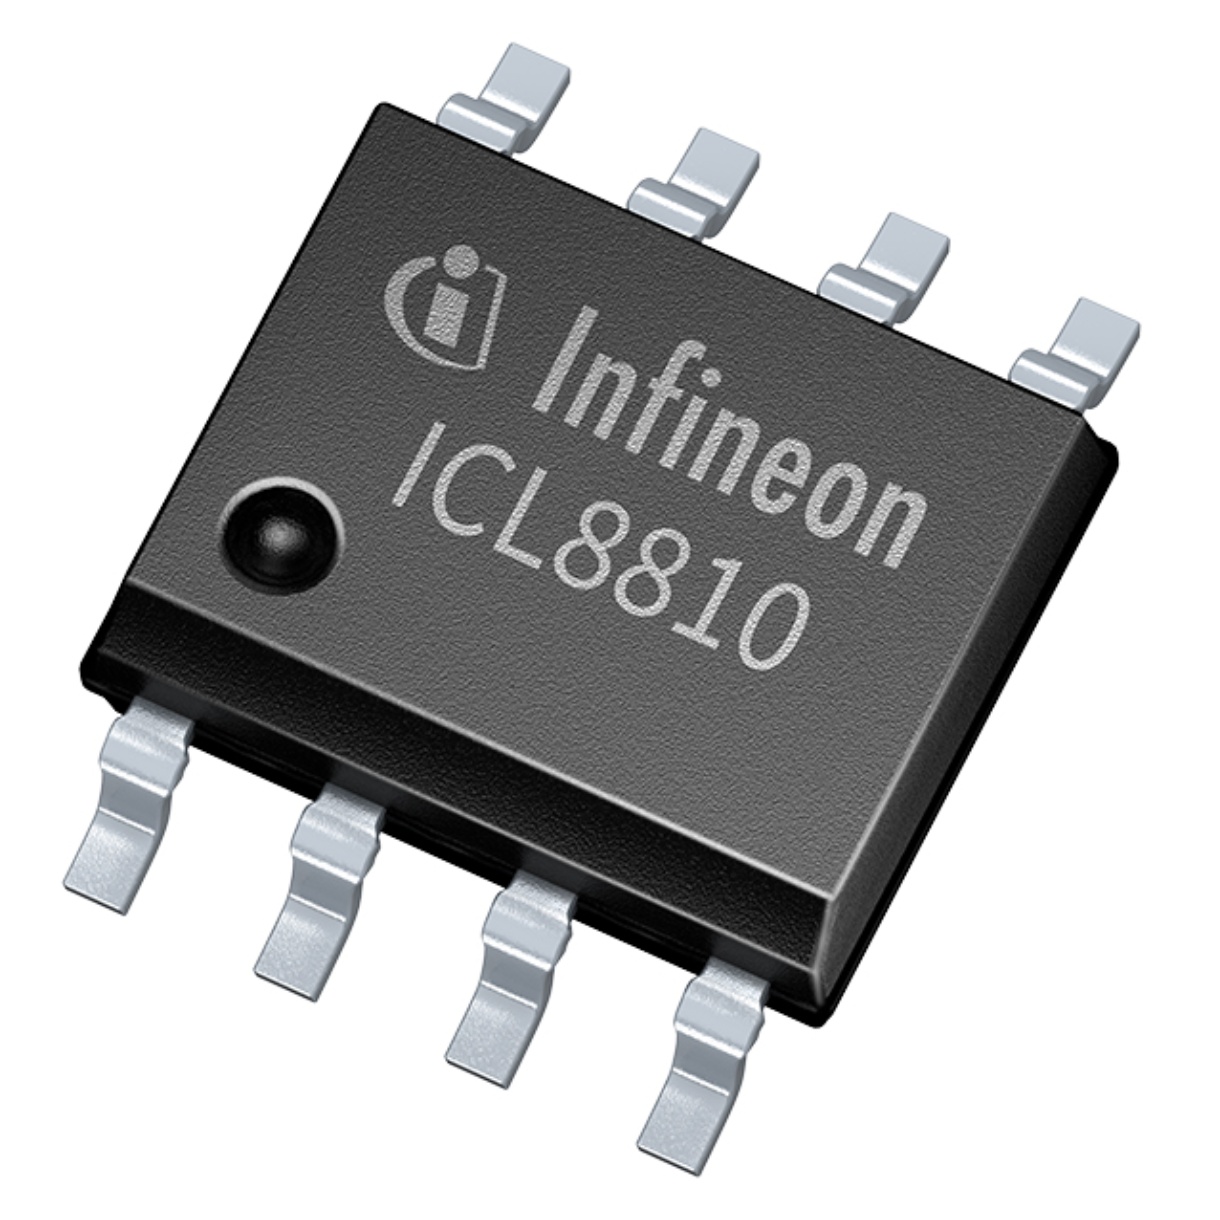 thema Vermelden Overtreden Solutions for LED drivers - Infineon Technologies